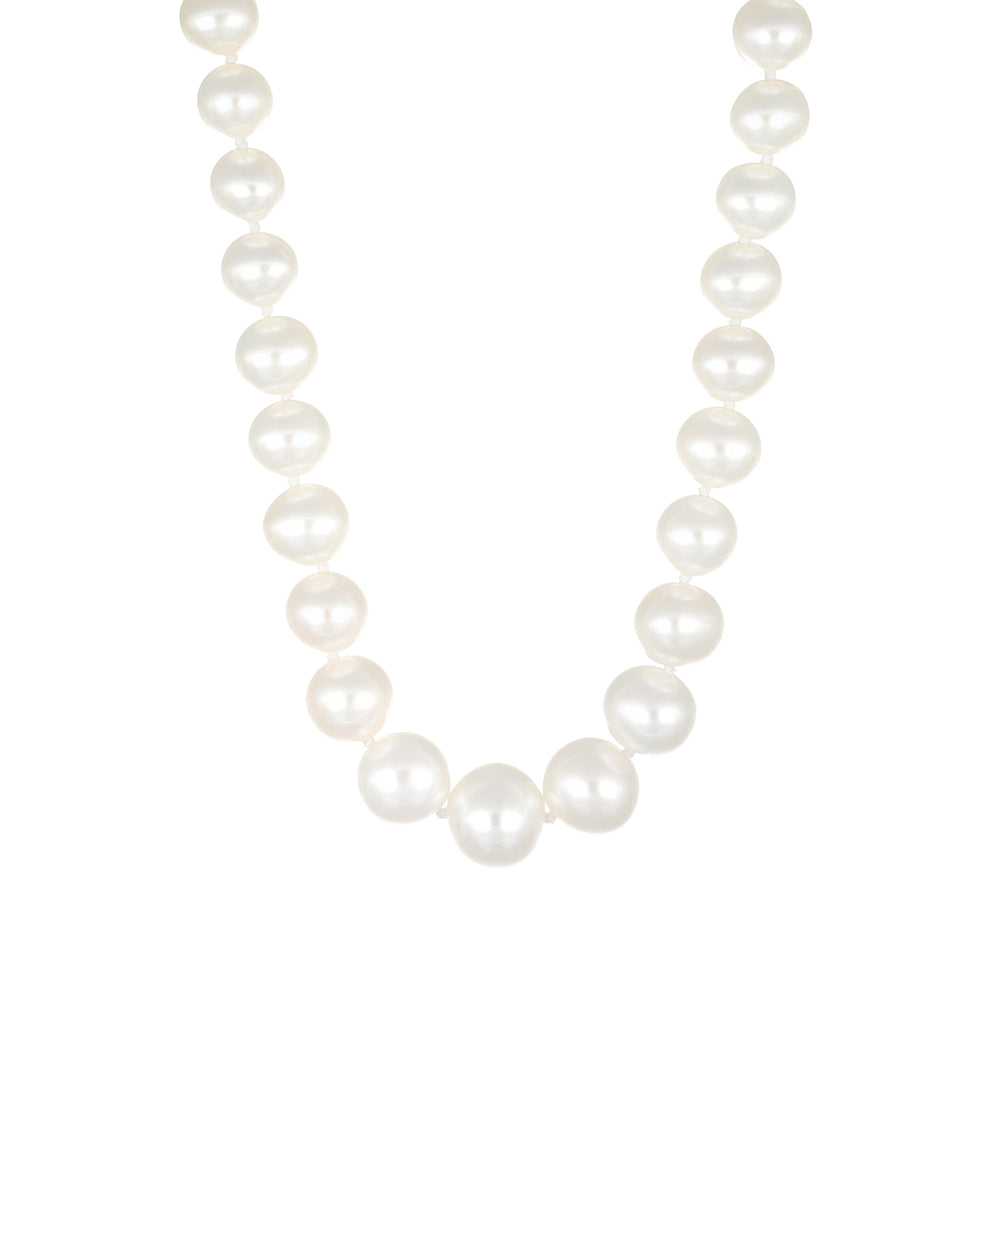 5-10mm Graduated Freshwater Pearl Necklace